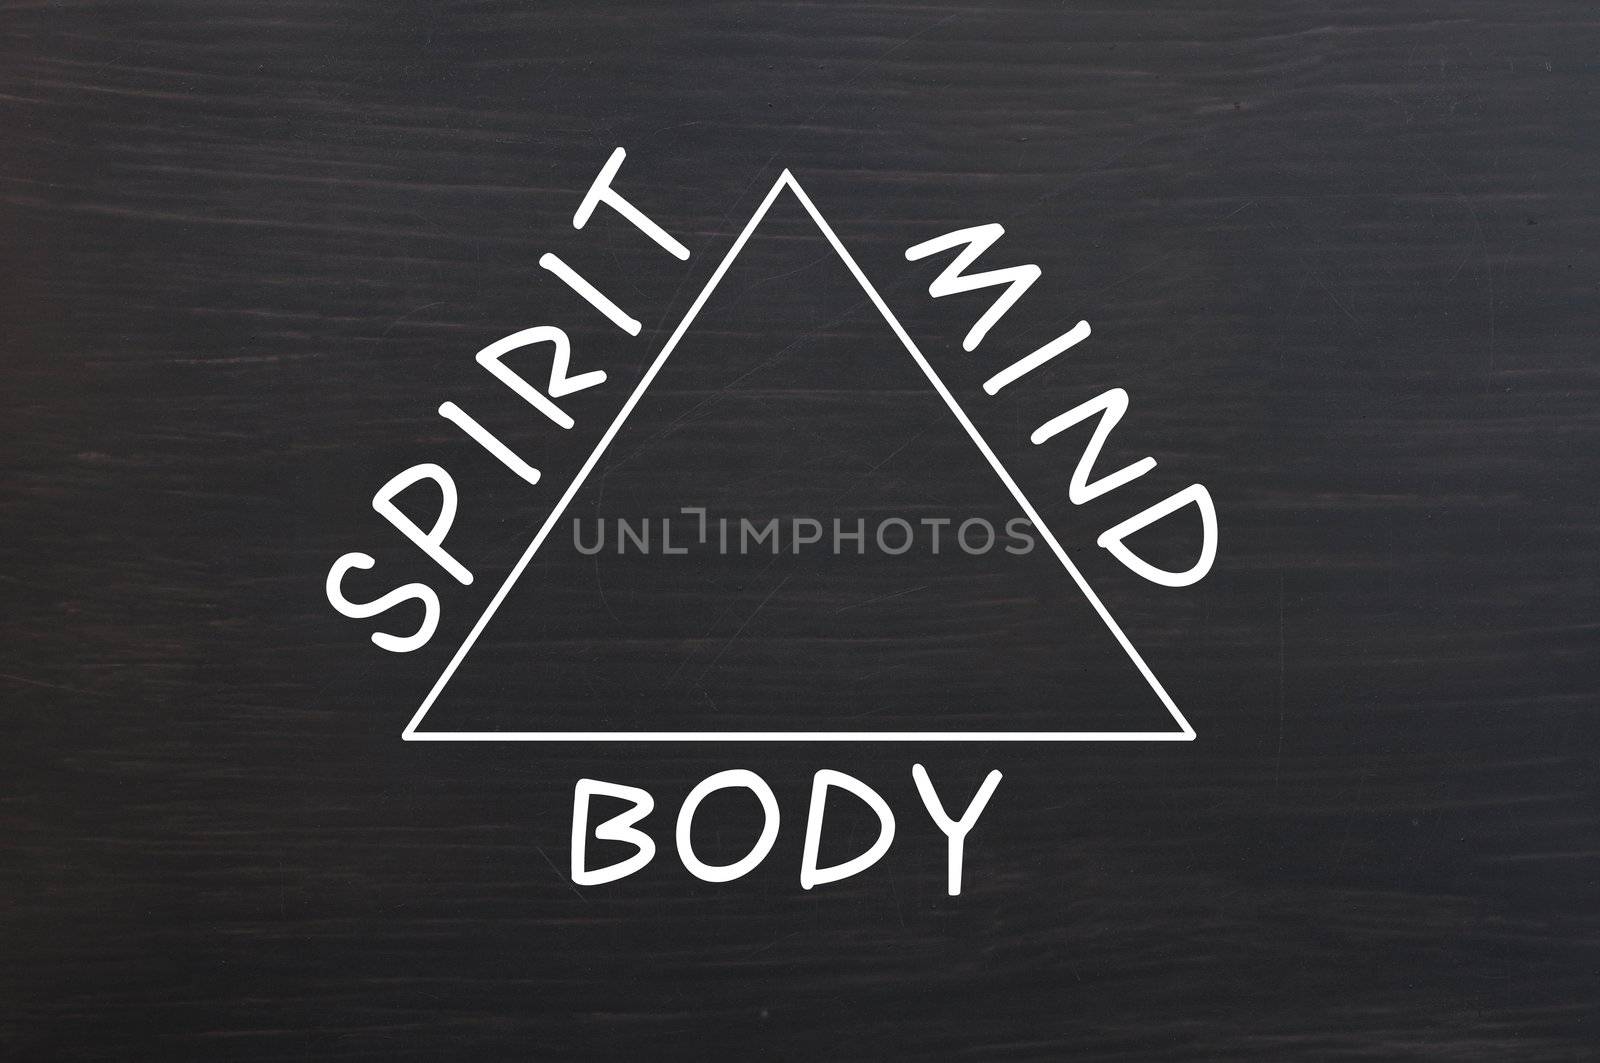 Chalk drawing of Relationship between body, mind and spirit by bbbar